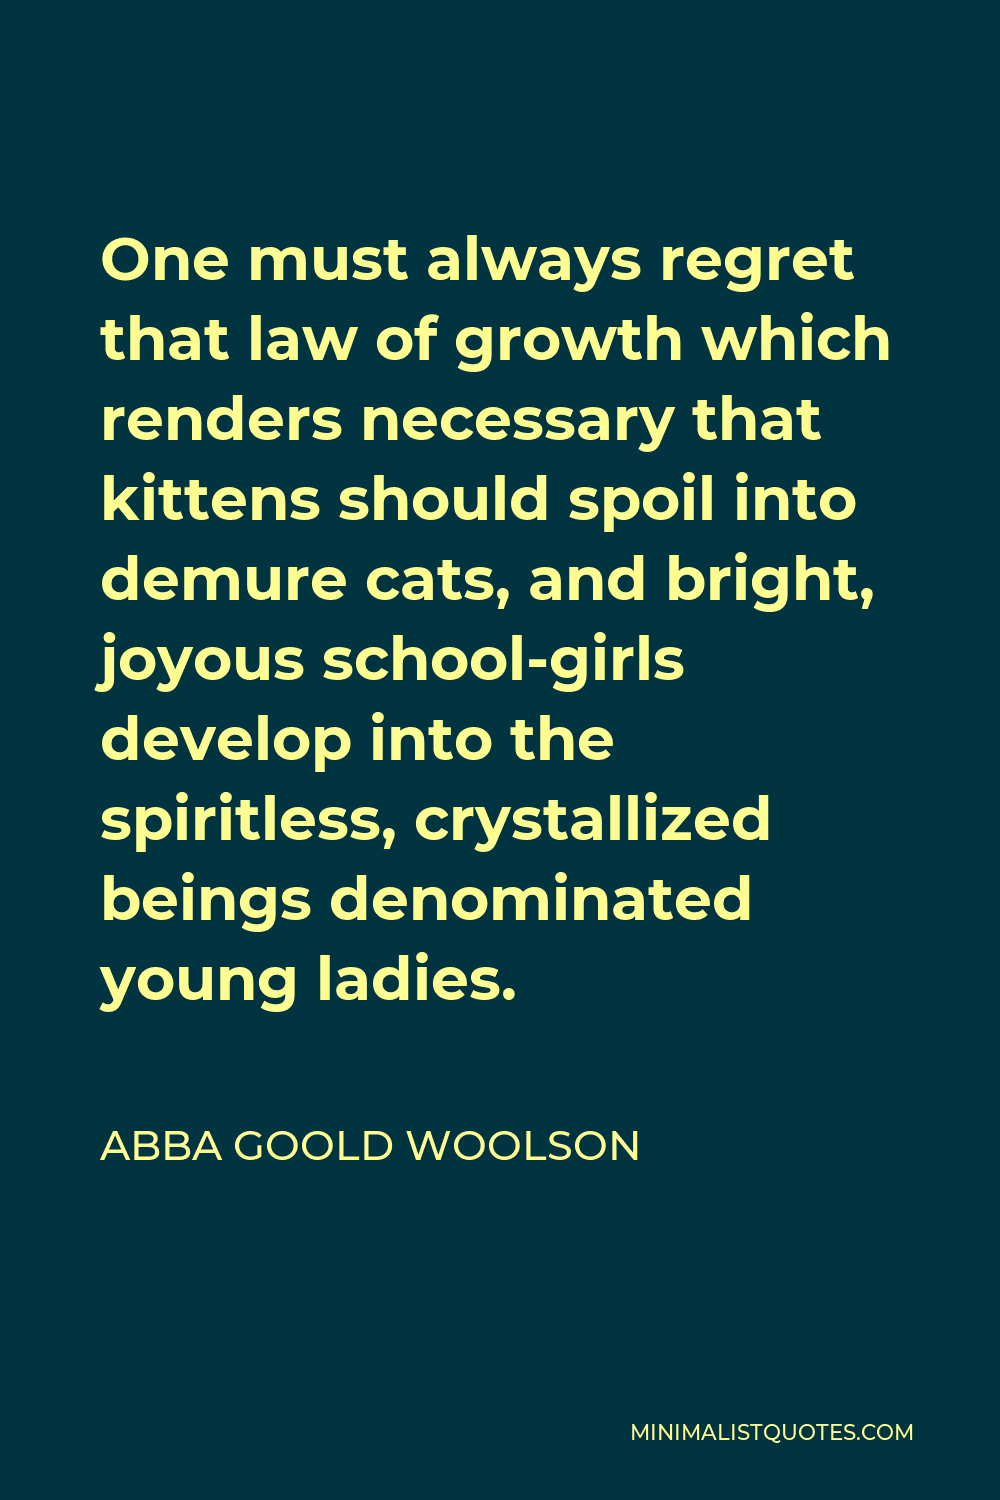 Abba Goold Woolson Quote - One must always regret that law of growth which renders necessary that kittens should spoil into demure cats, and bright, joyous school-girls develop into the spiritless, crystallized beings denominated young ladies.